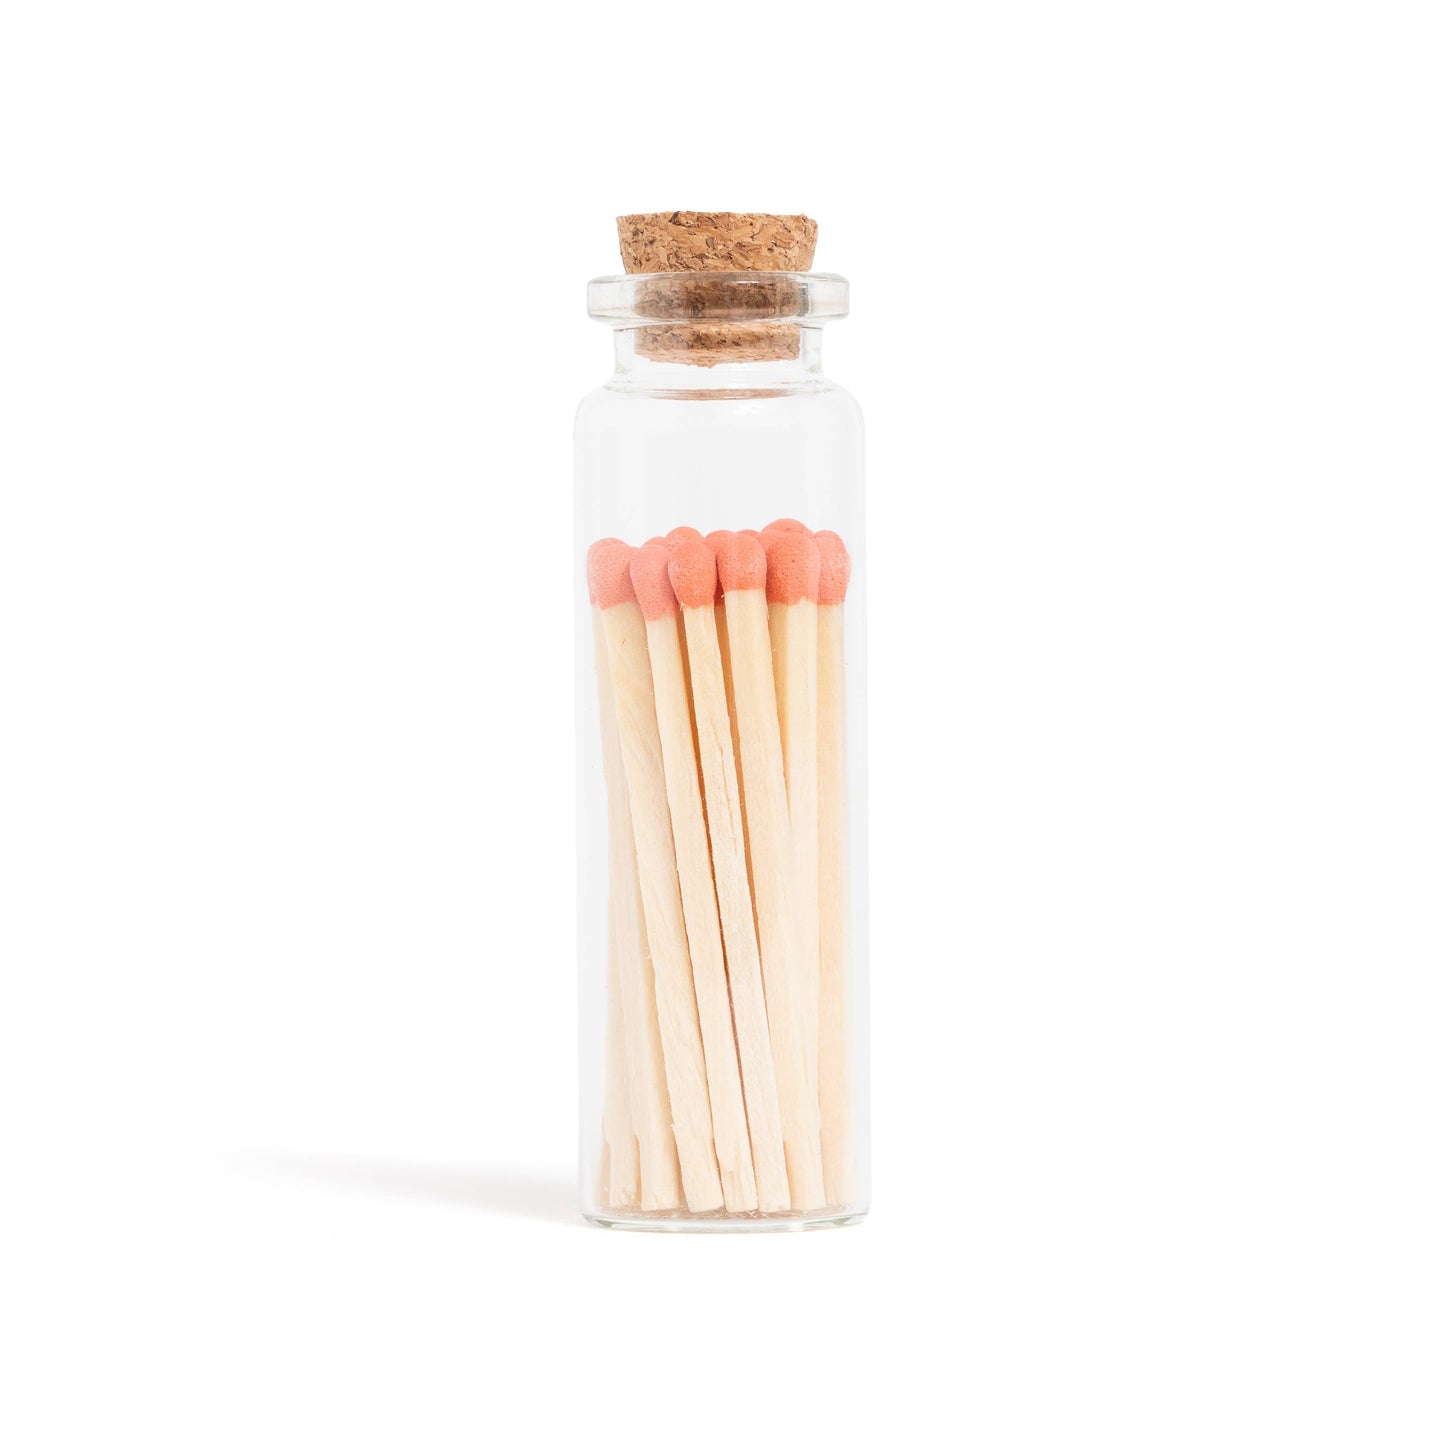 Enlighten the Occasion - Tangerine Matches in Small Corked Vial